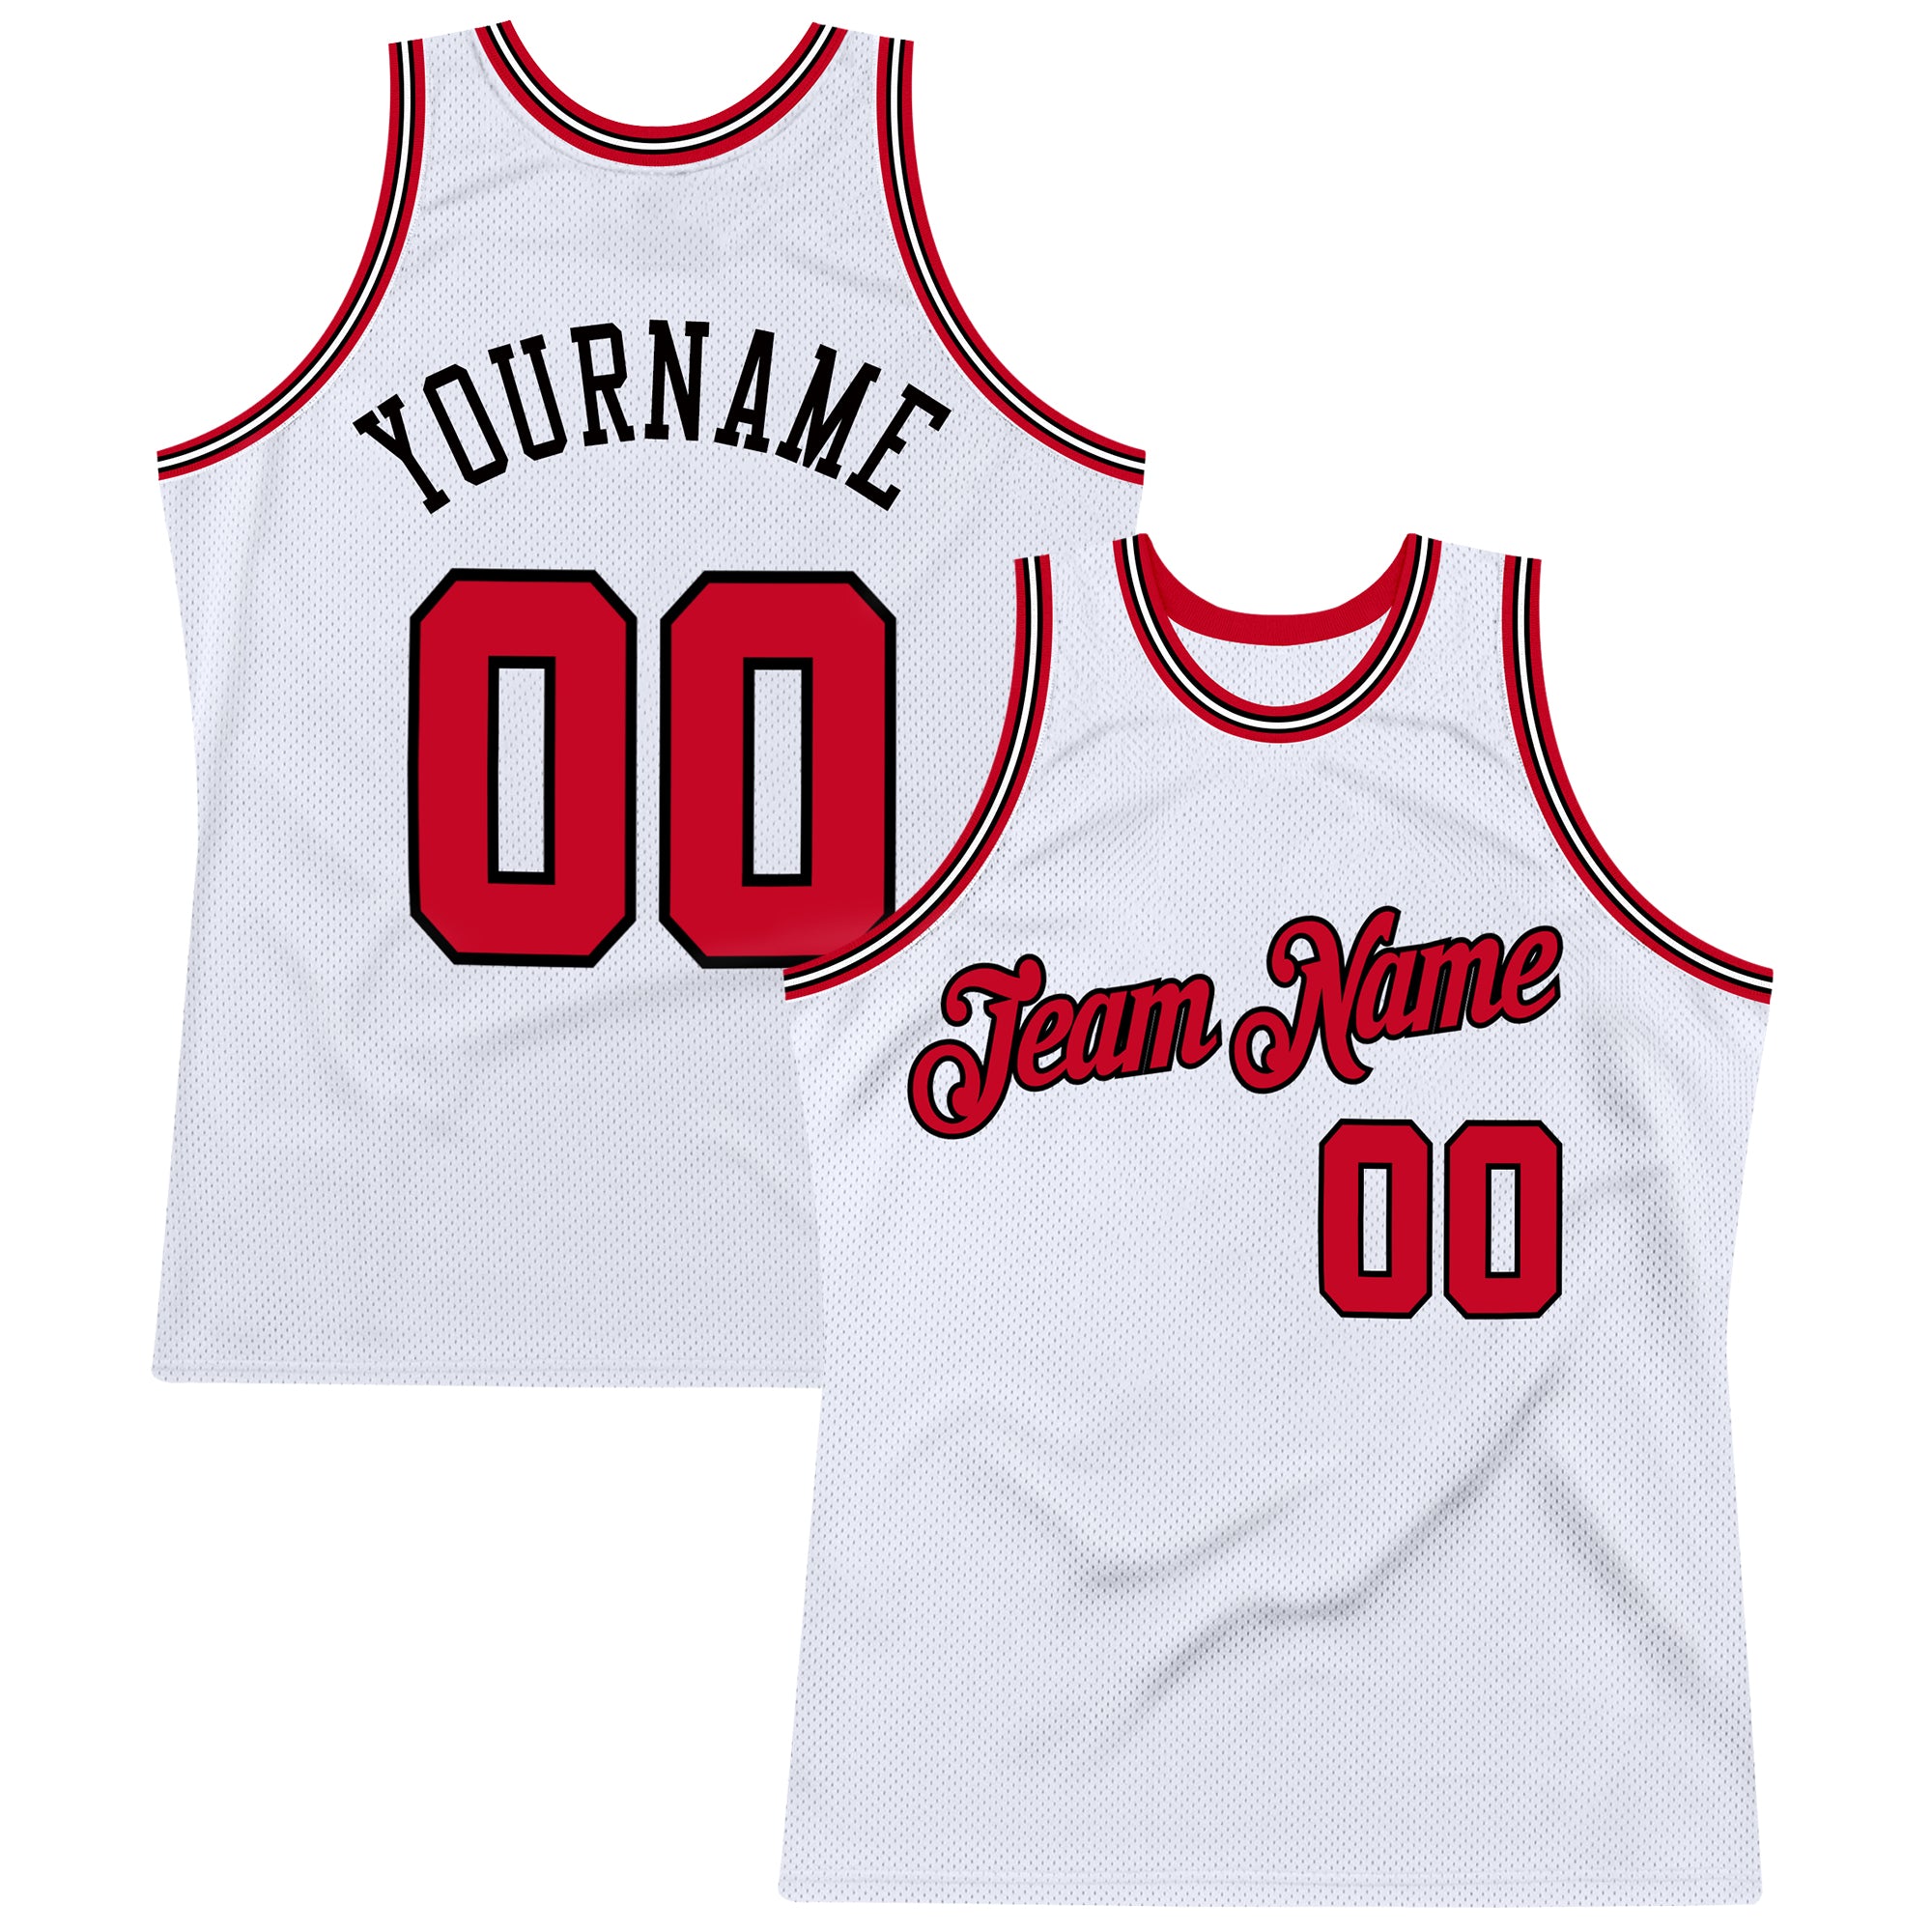 FANSIDEA Custom White Red-Black Authentic Throwback Basketball Jersey Men's Size:M